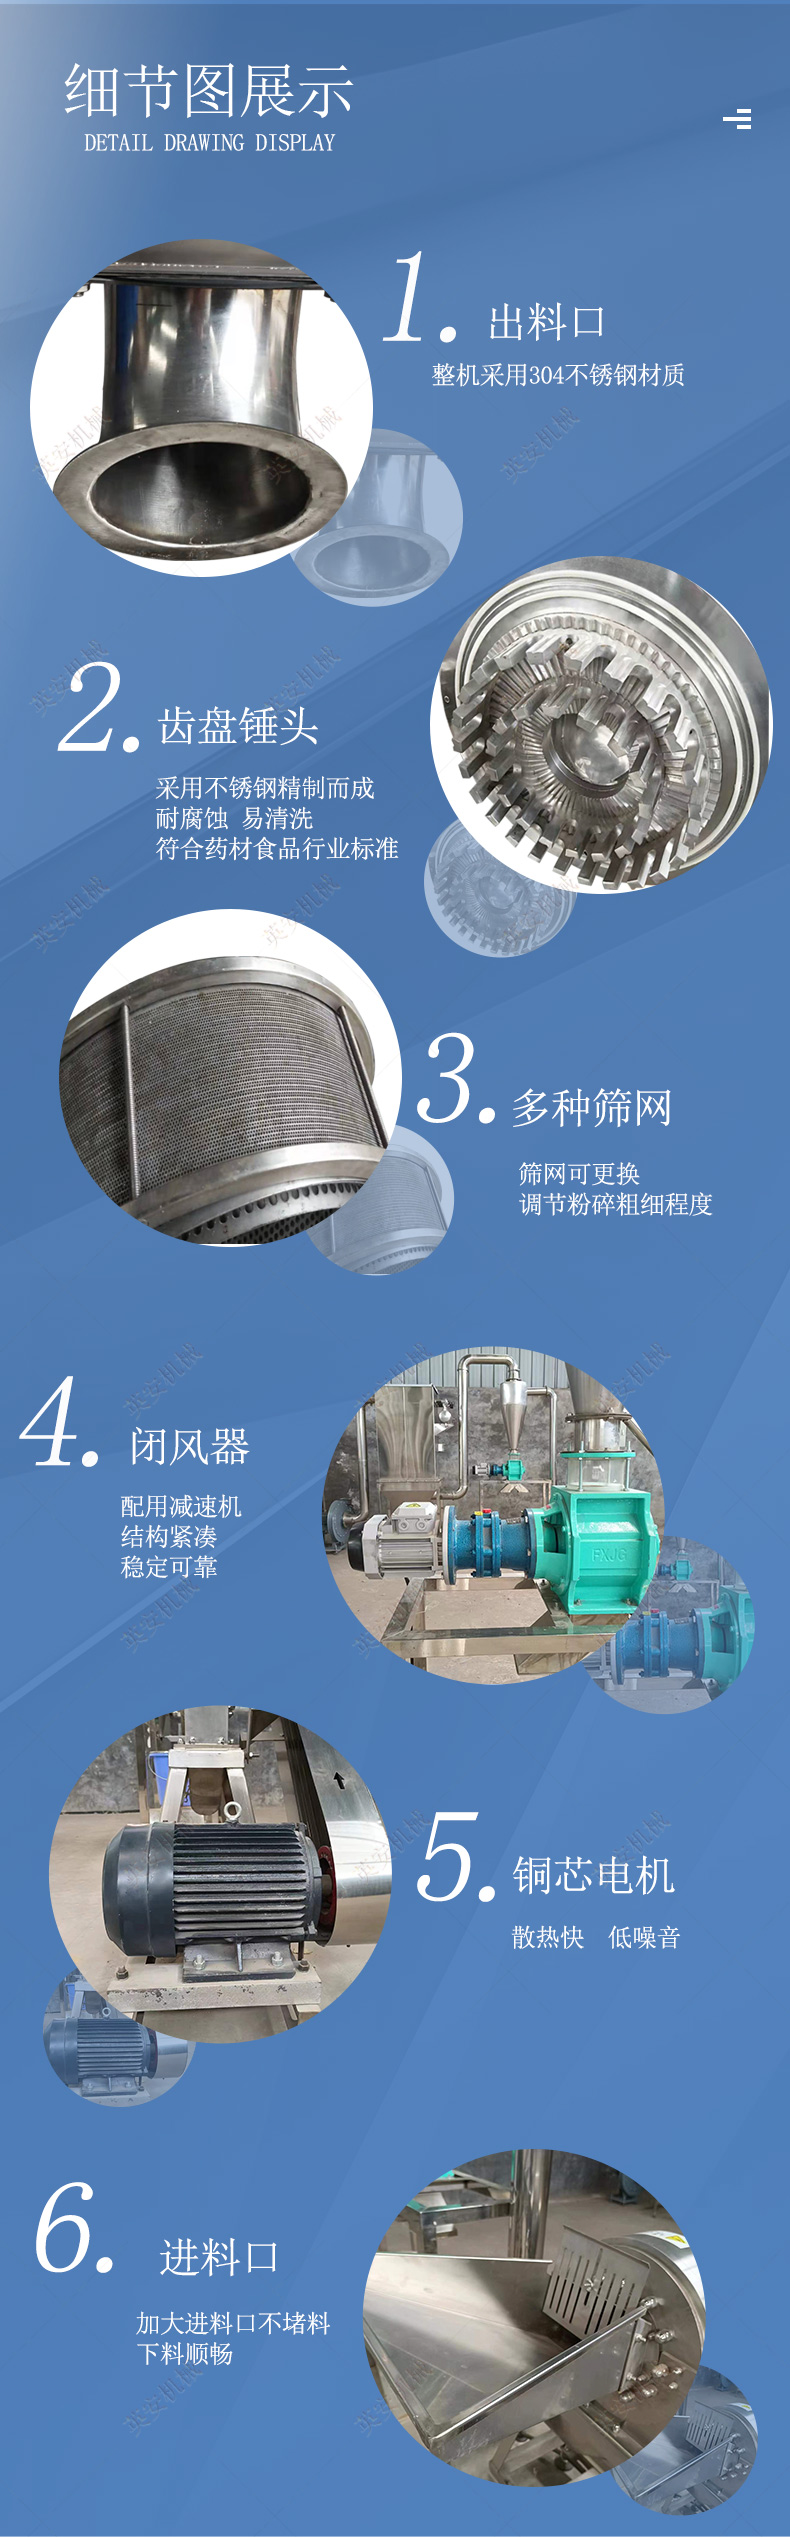 Small white sugar and salt grinding machine, stainless steel toothed claw crusher, five grain and miscellaneous grain dust removal and pulverizing machine